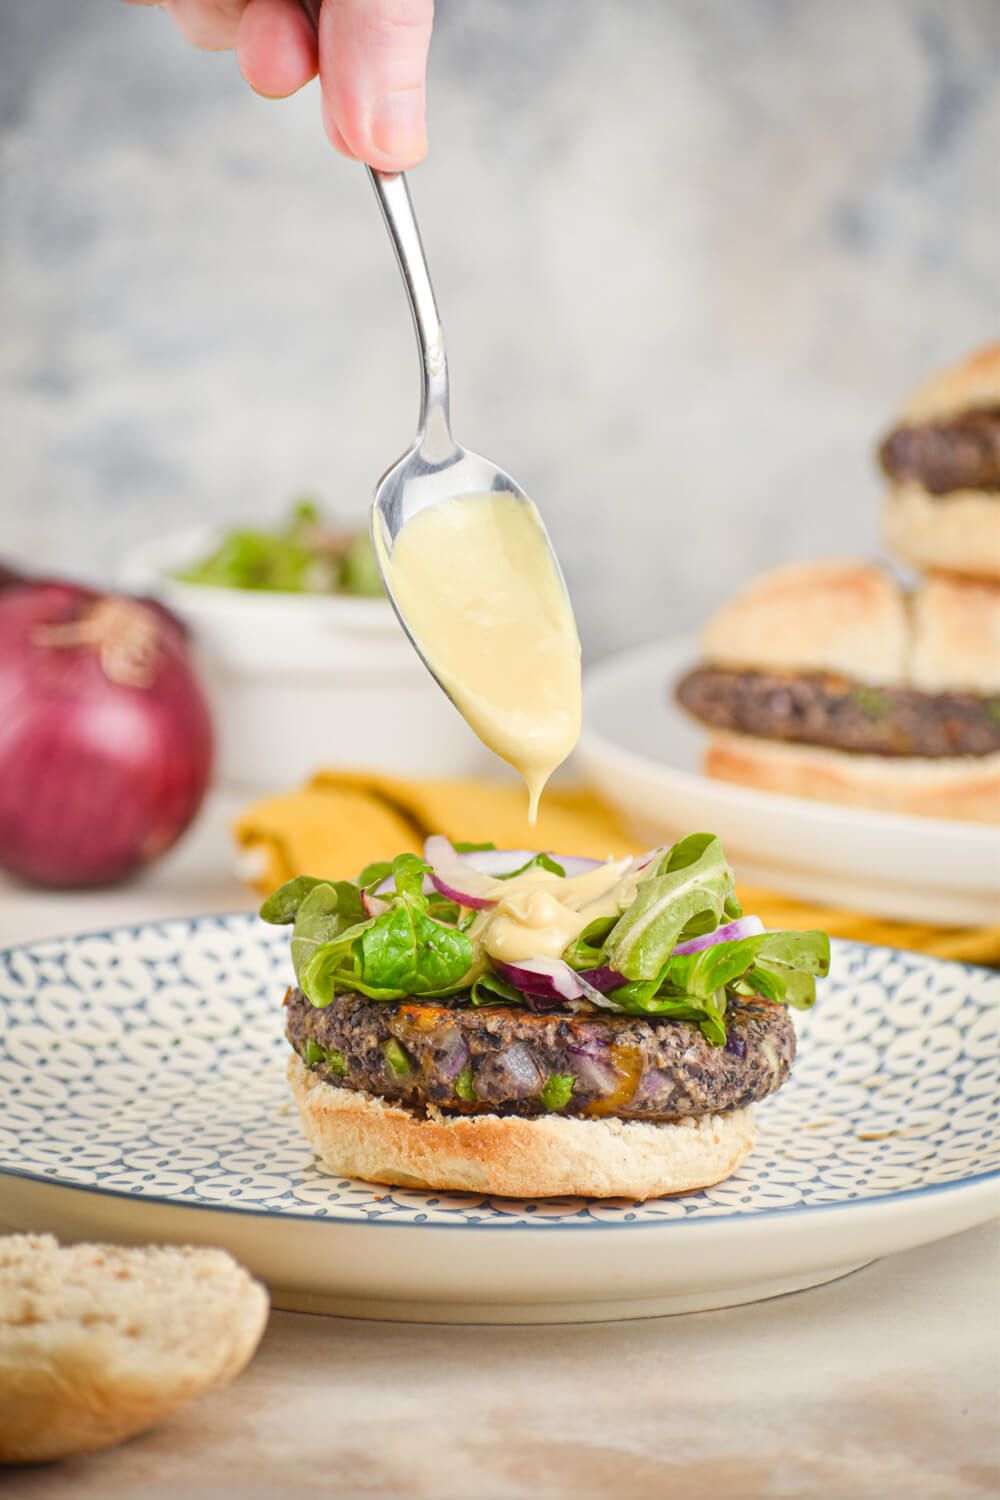 Vegetarian jalapeno cheddar black bean burgers with honey mustard sauce being dripped on top by a spoon.